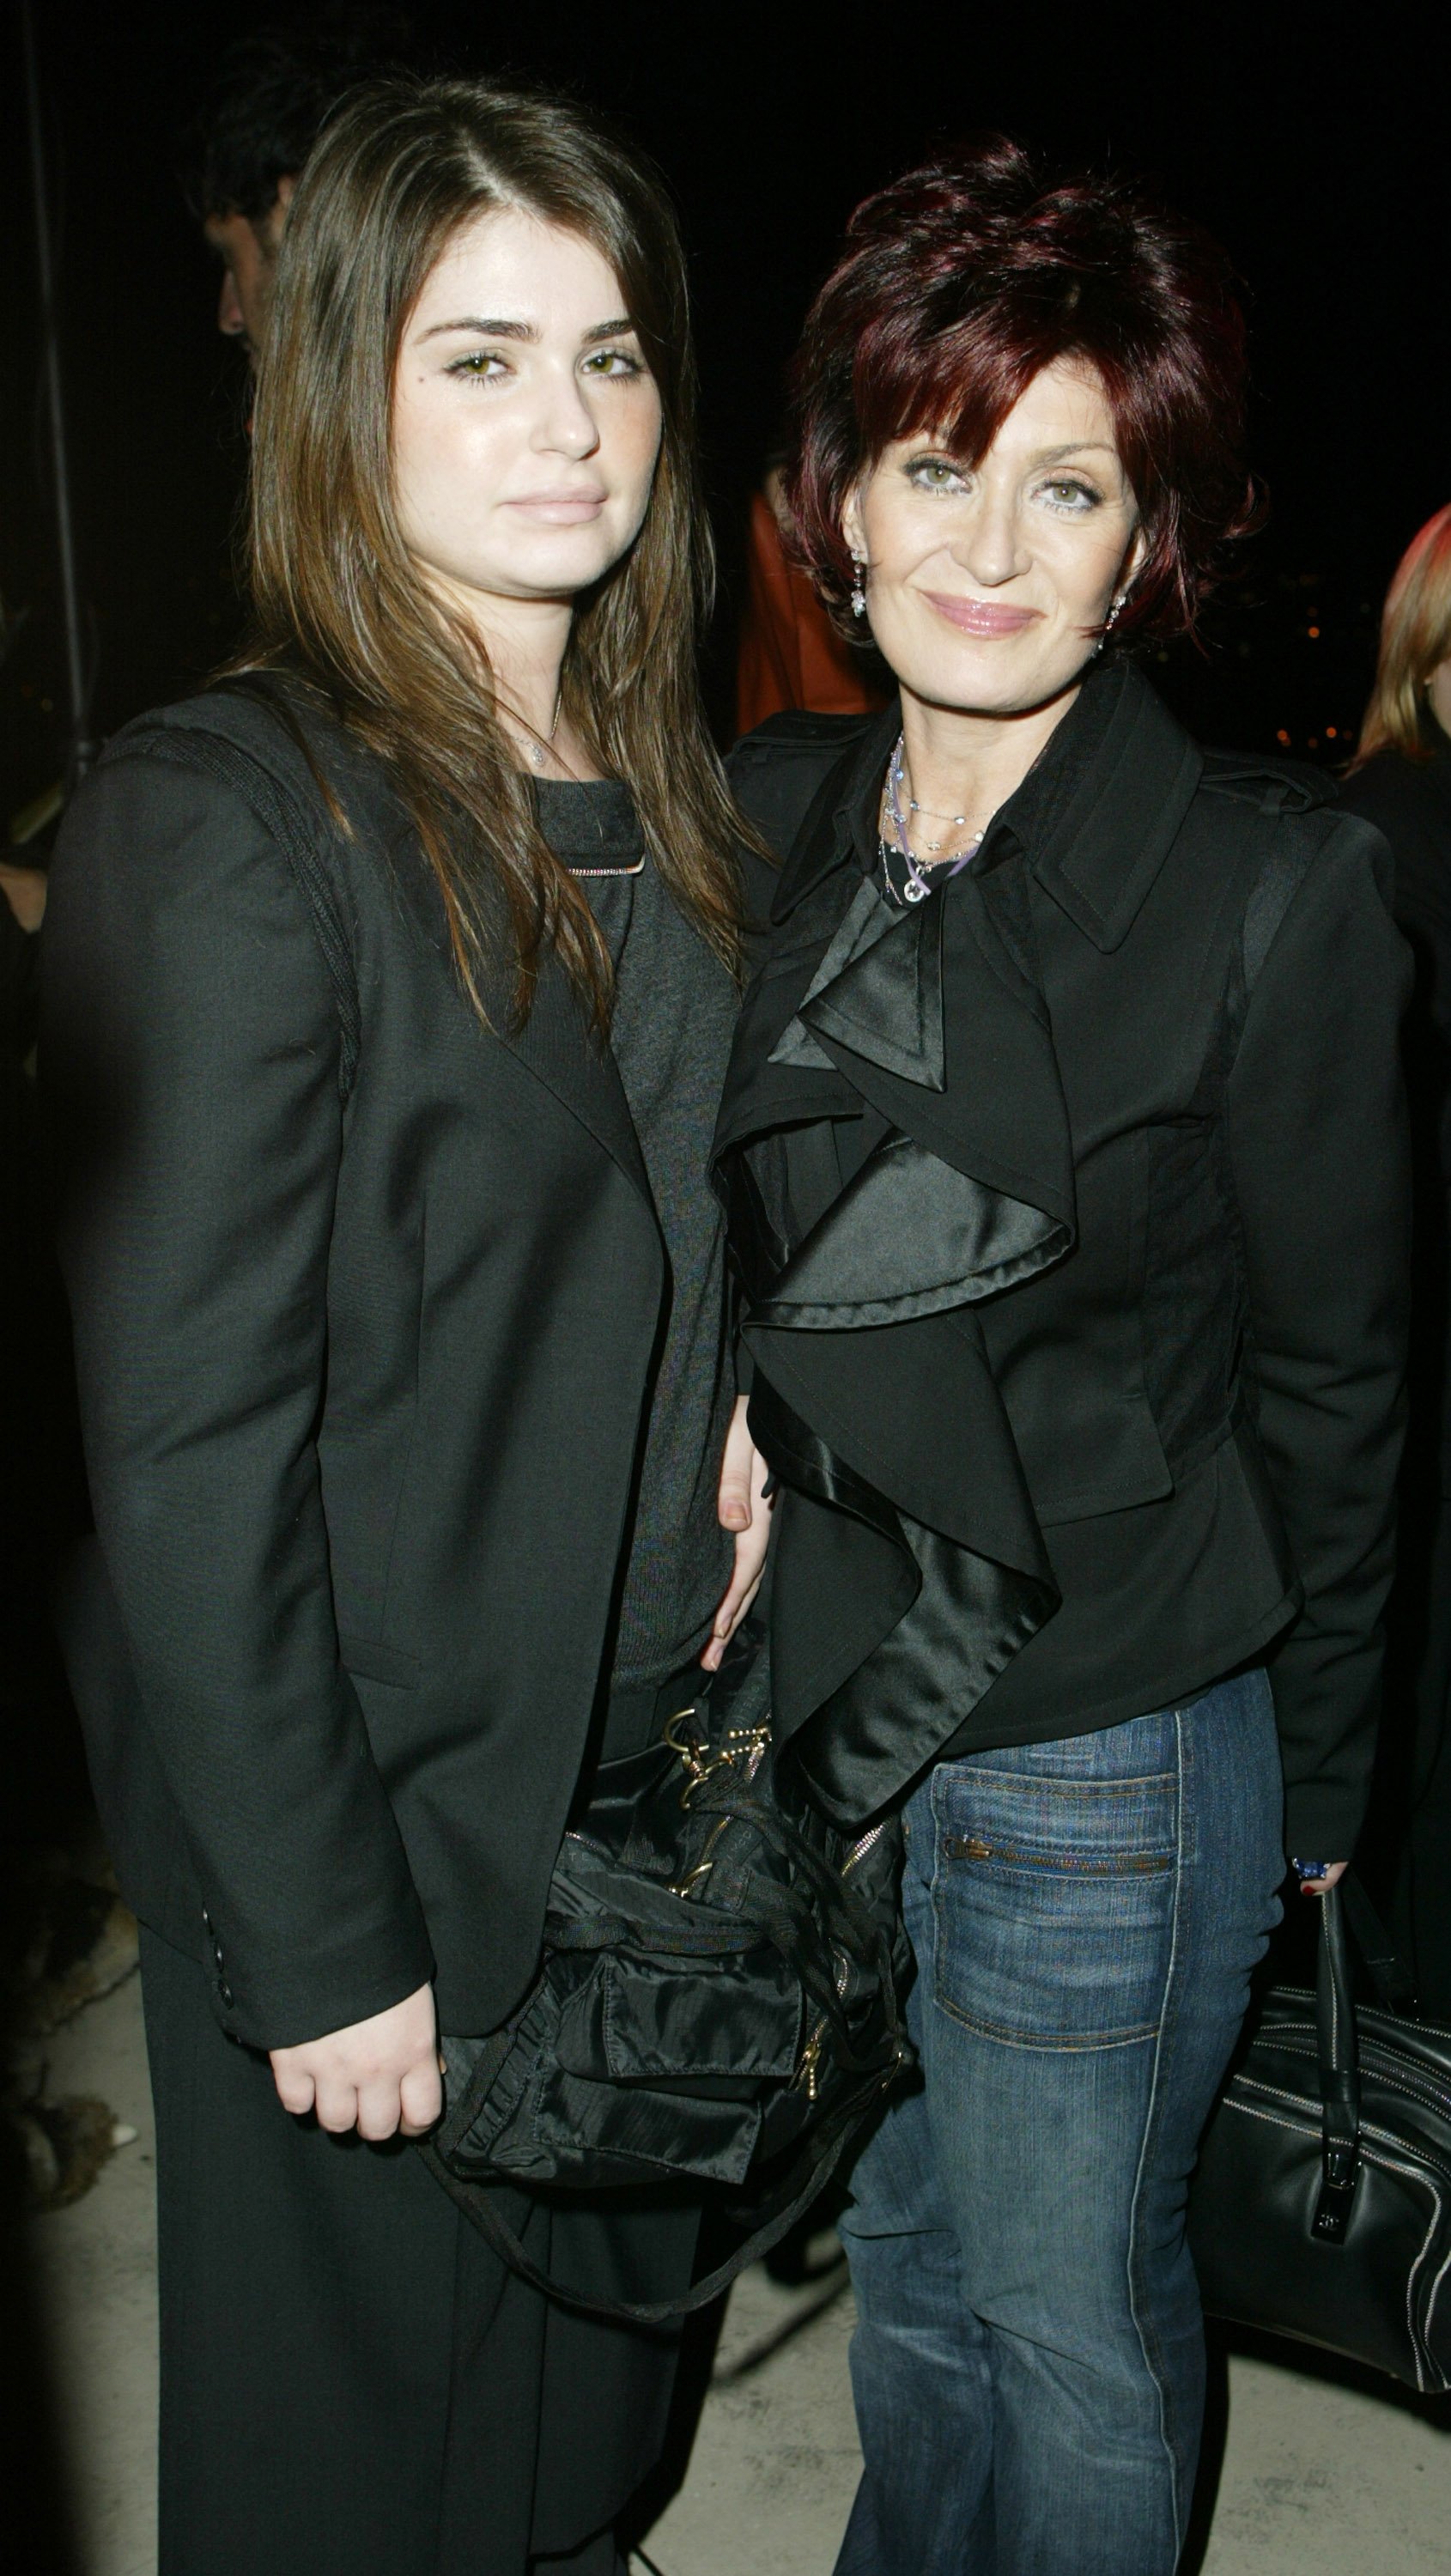 Singer Aimee Osbourne with her mother TV personality Sharon Osbourne during "The Heart is Deceitful Above All Things" Wrap Party at Chateau Marmont in Los Angeles, California. | Source: Getty Images